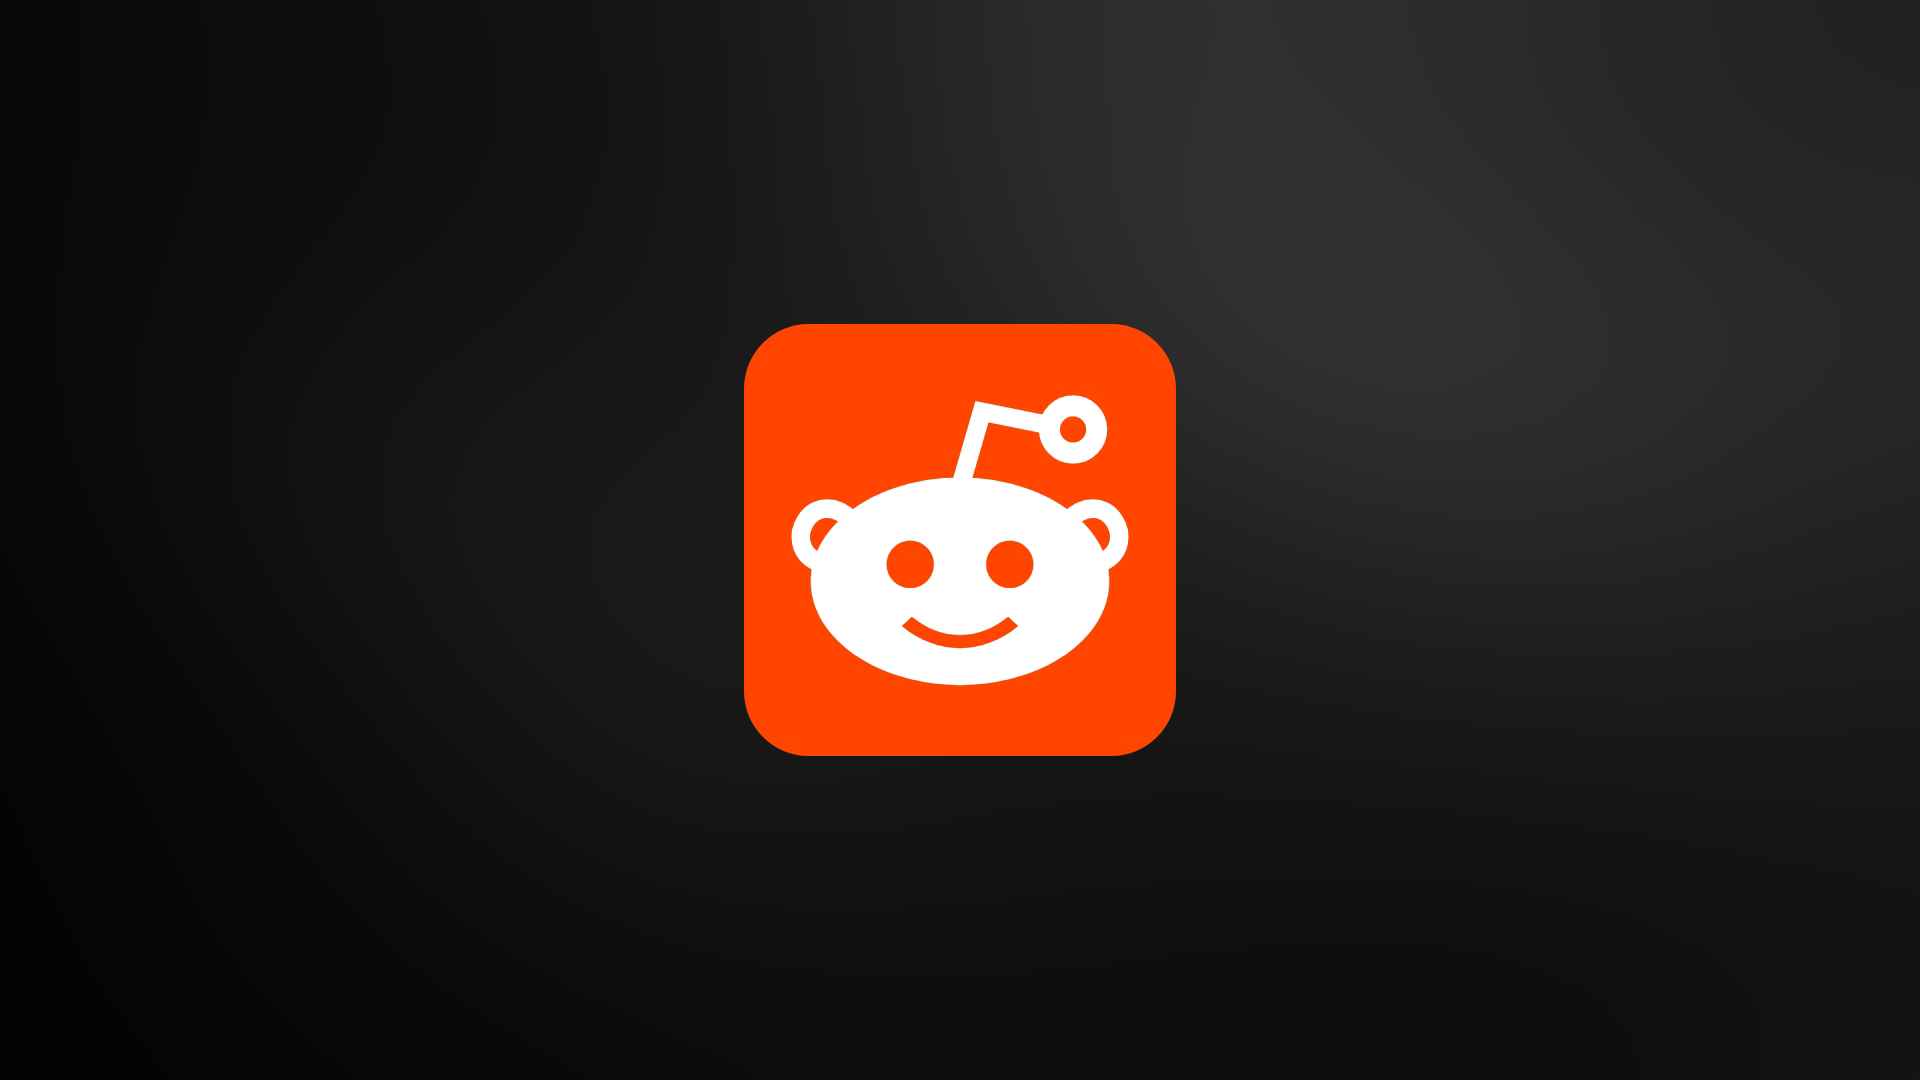 How can users stay updated on new features, updates, or changes to the Reddit platform?